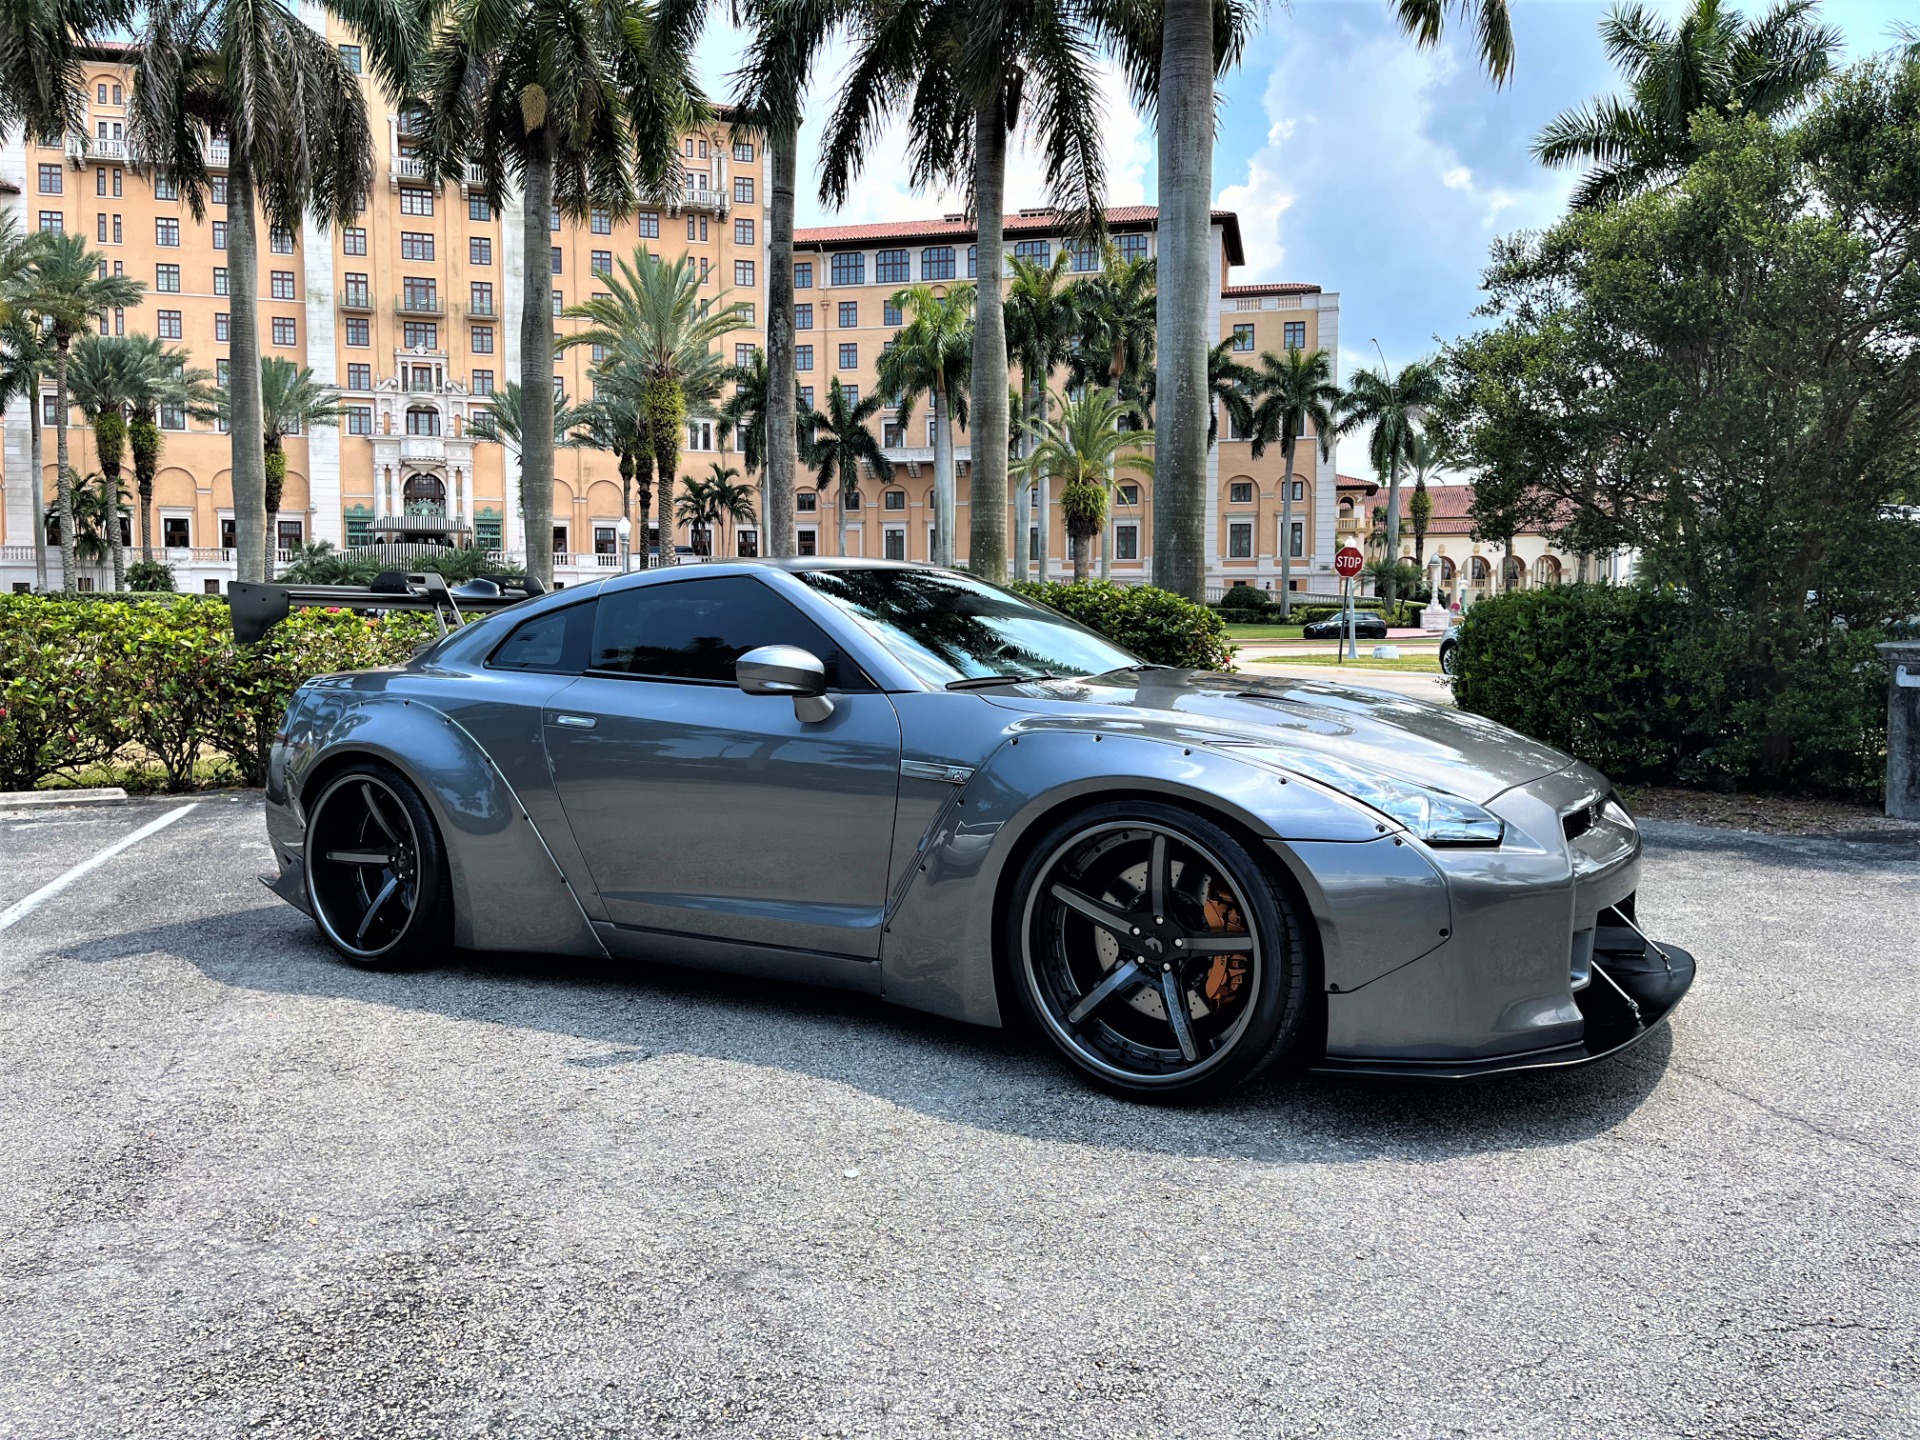 Used 2014 Nissan GT-R Track Edition for sale $144,850 at The Gables Sports Cars in Miami FL 33146 1